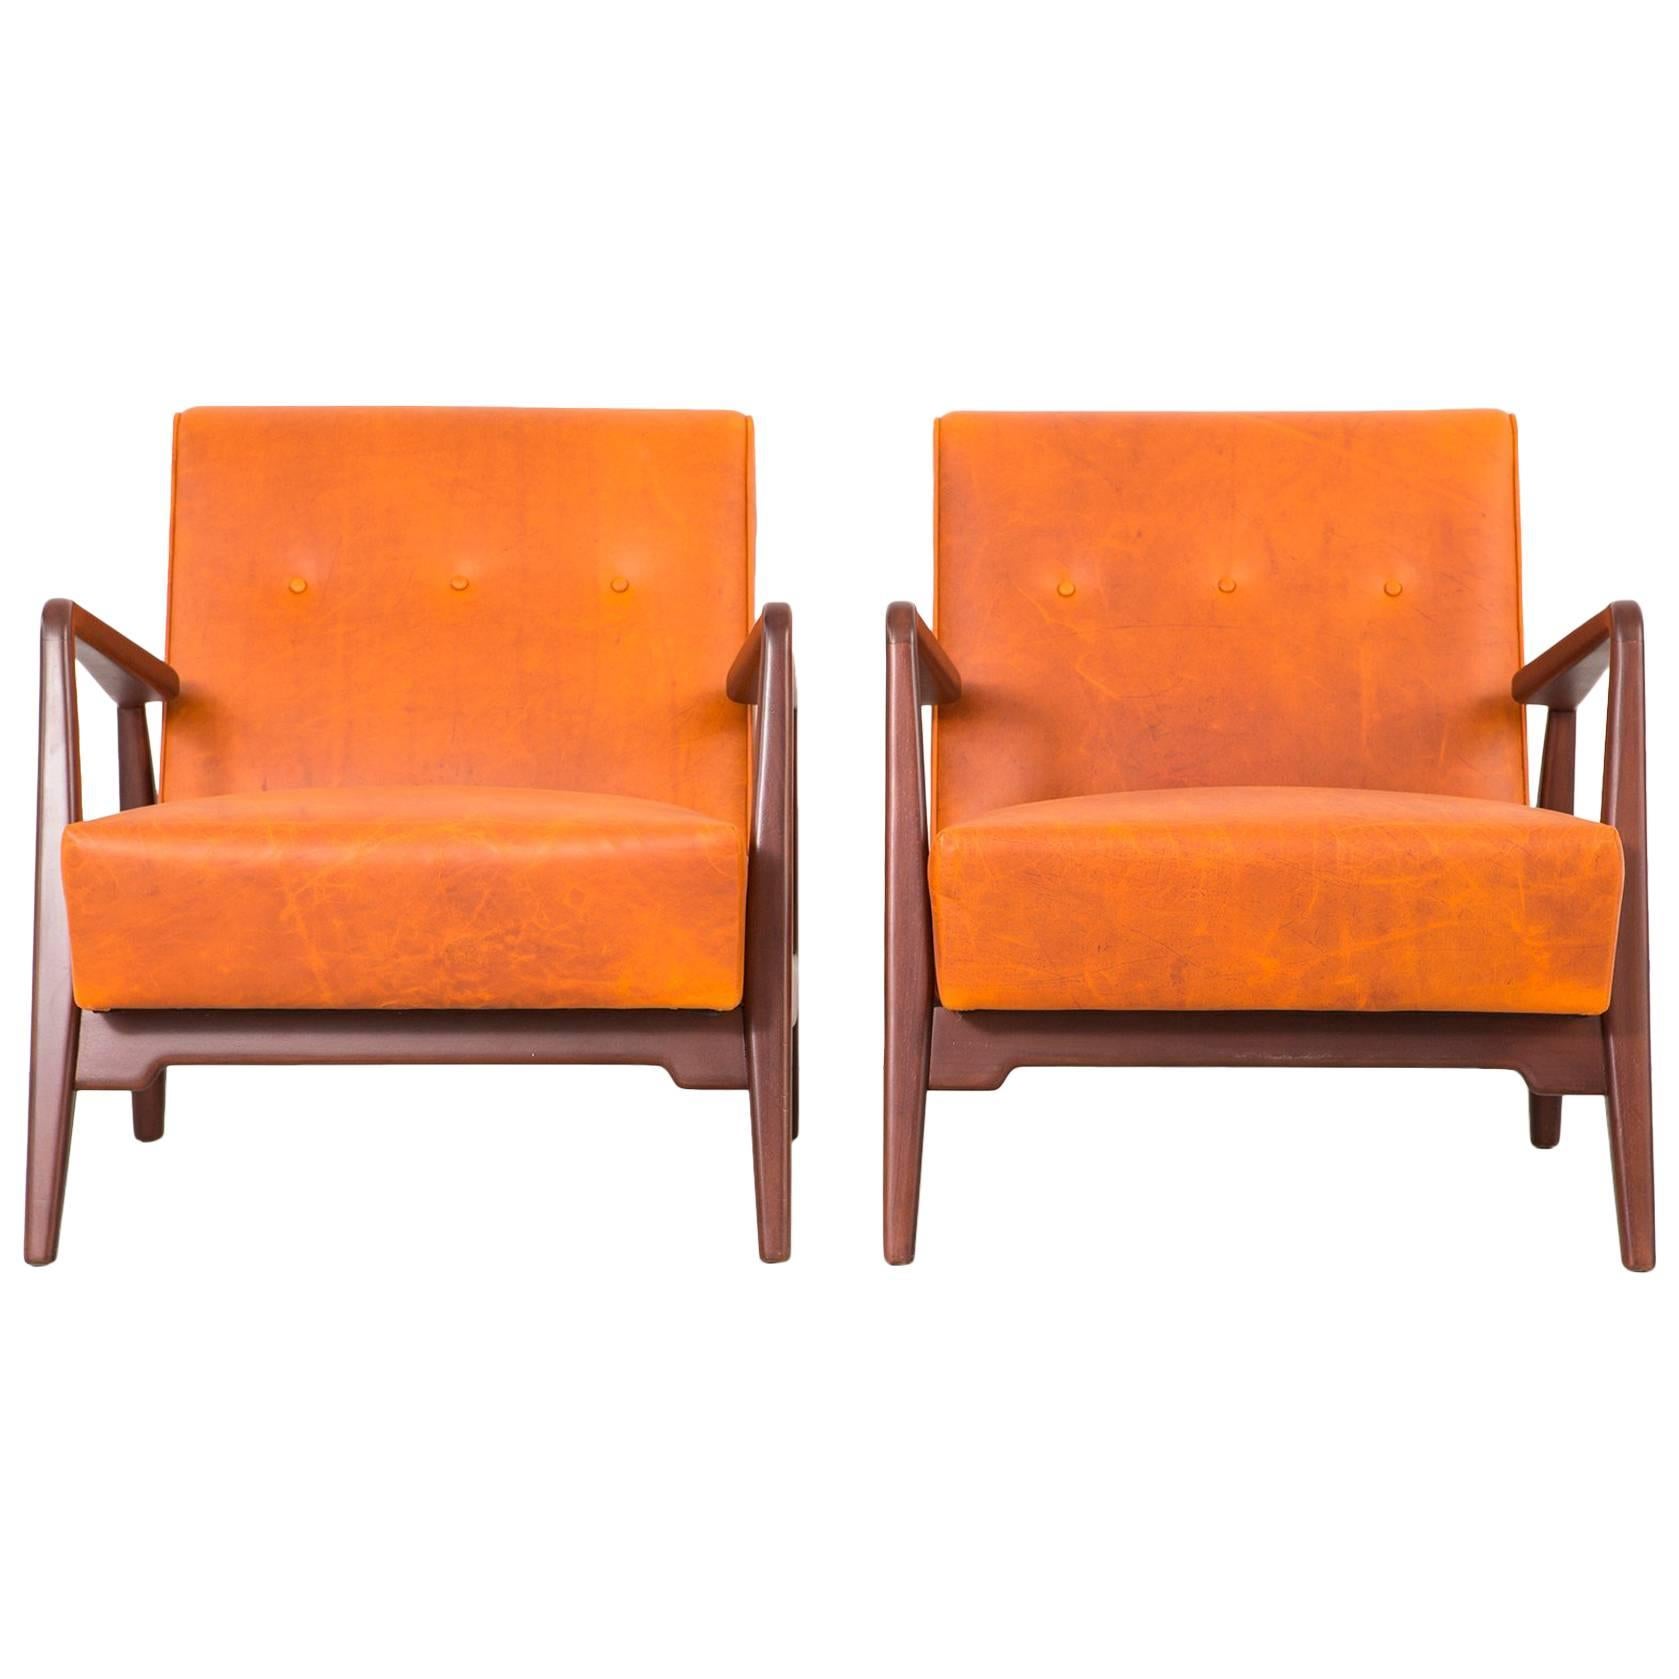 Set of Mid-Century Modern Jens Risom Lounge Chairs Newly Reupholstered